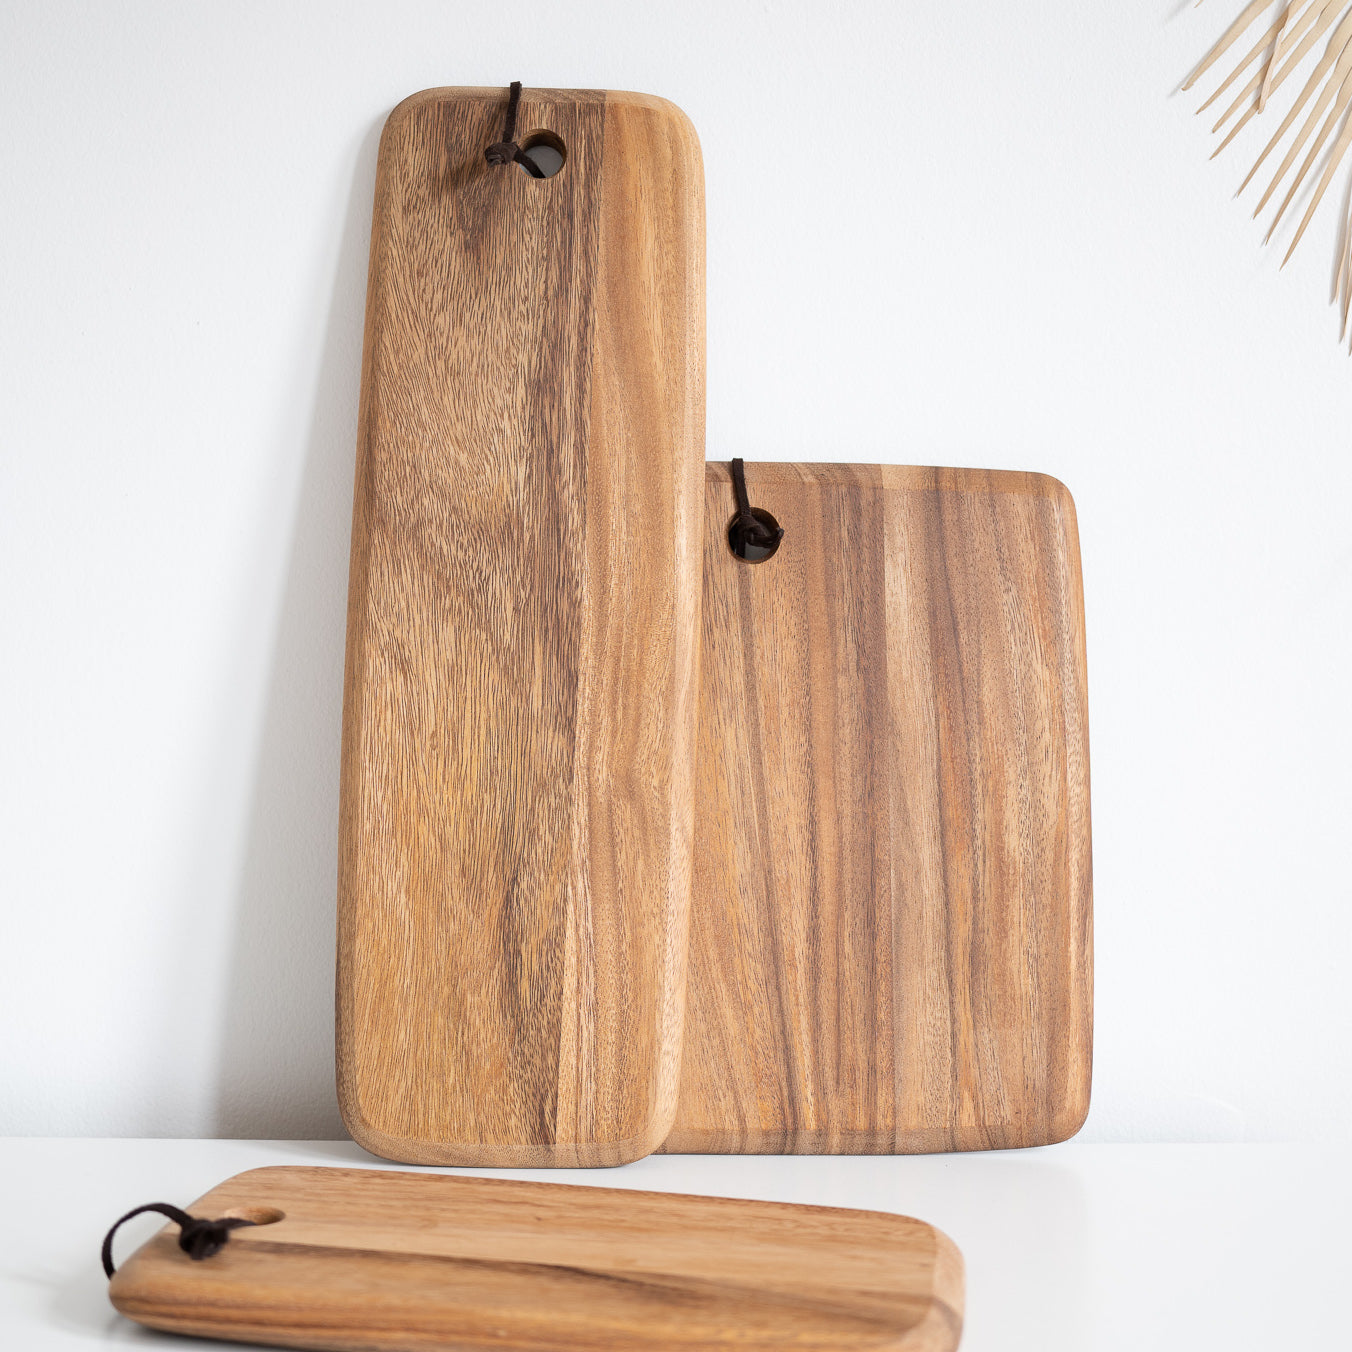 Square and slim rectangular acacia wood board with leather strap